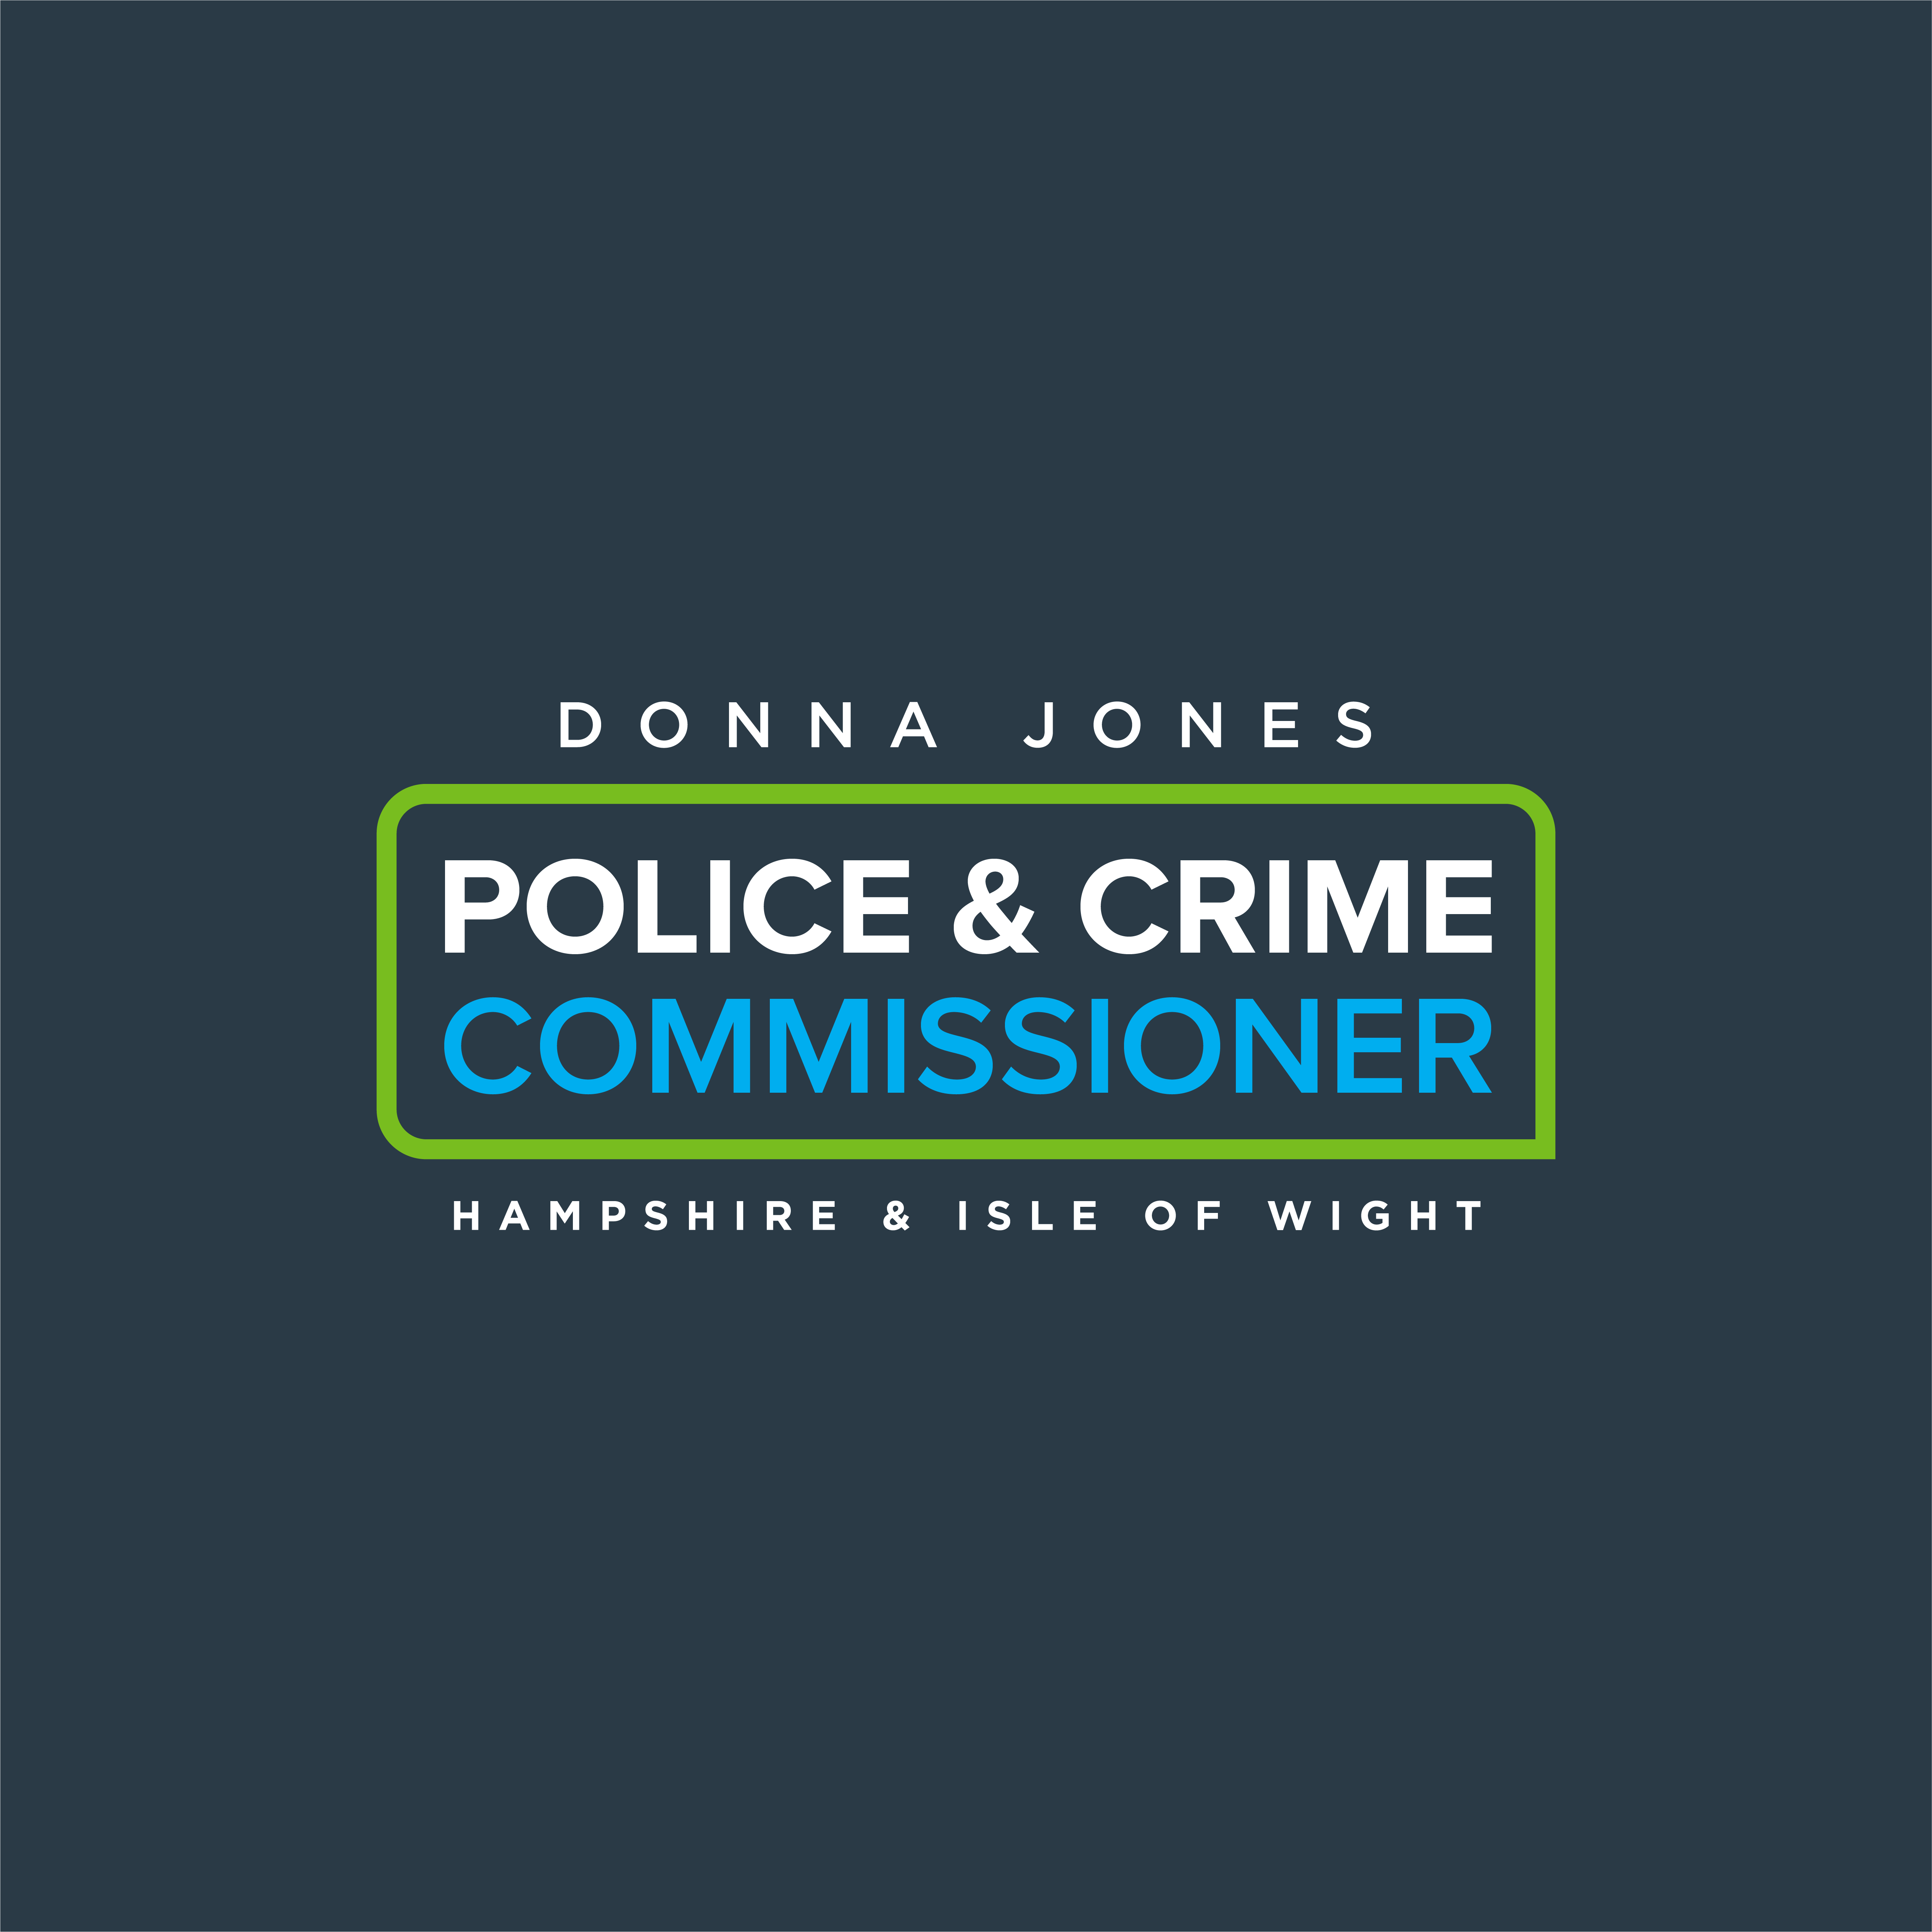 Logo of the office of the Police and Crime commissioner for Hampshire and Isle of Wight